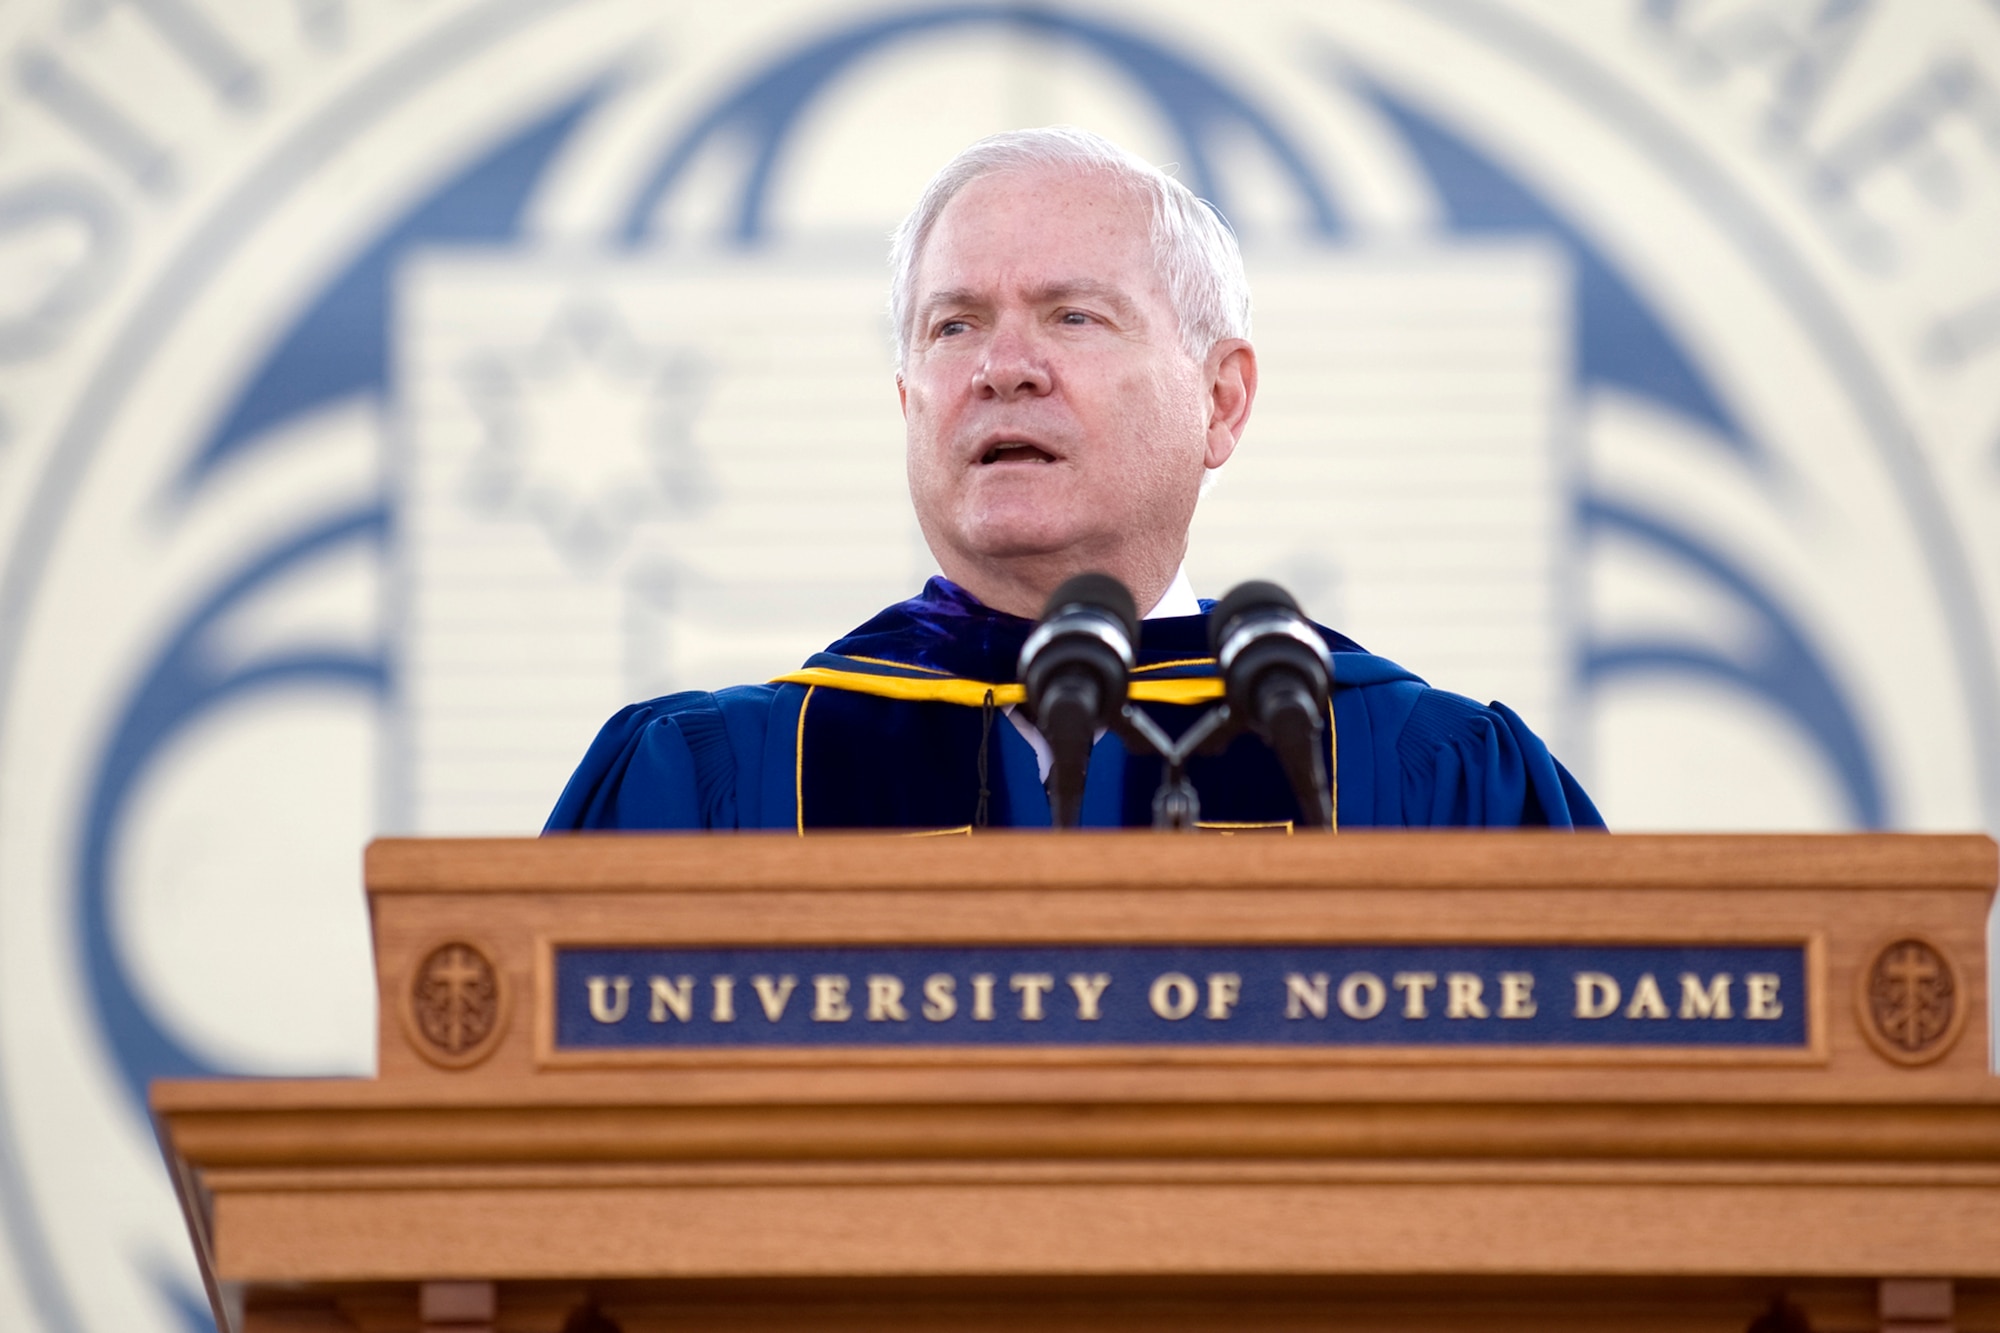 Defense Secretary Robert M. Gates speaks during the University of Notre Dame commencement ceremony May 22, 2011, in South Bend, Ind. Secretary Gates told graduates that the size and strength of the U.S. military will be key to U.S. success in the 21st Century. (Defense Department photo/Cherie Cullen)